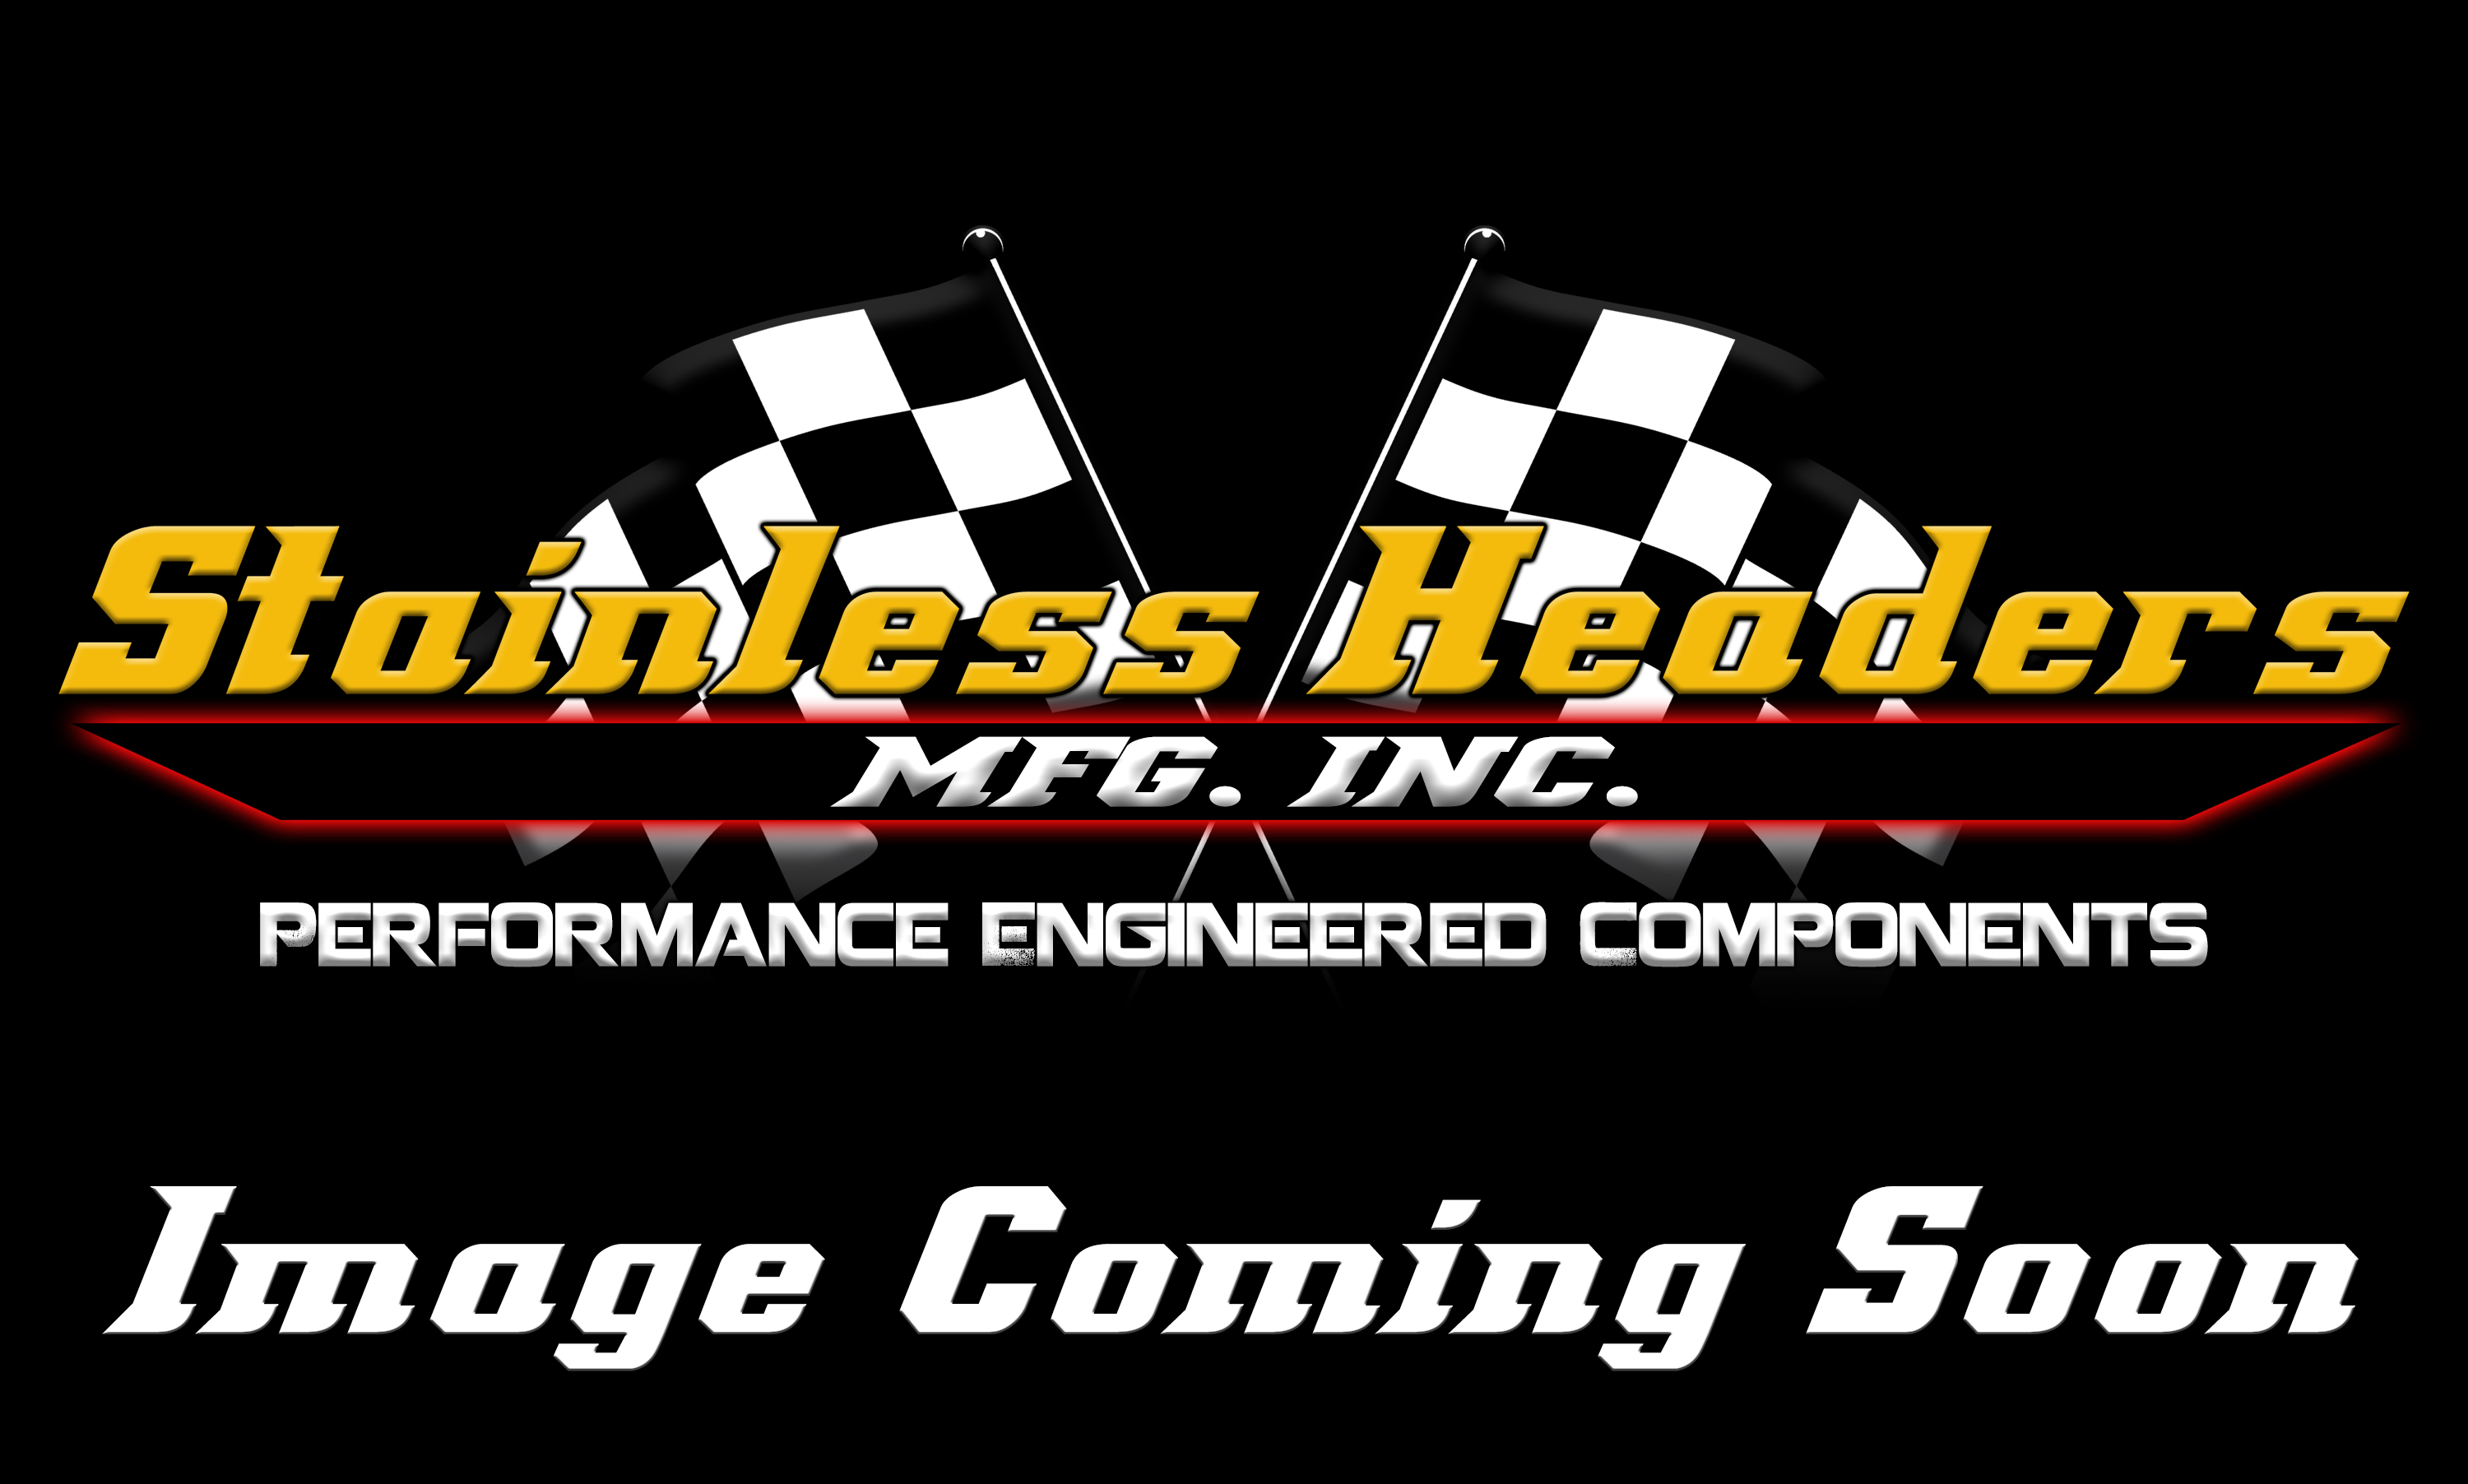 Custom Header Components - Merge Collectors - Stainless Headers - 1 7/8" Primary 2 into 1 Performance Merge Collector-16ga Mild Steel